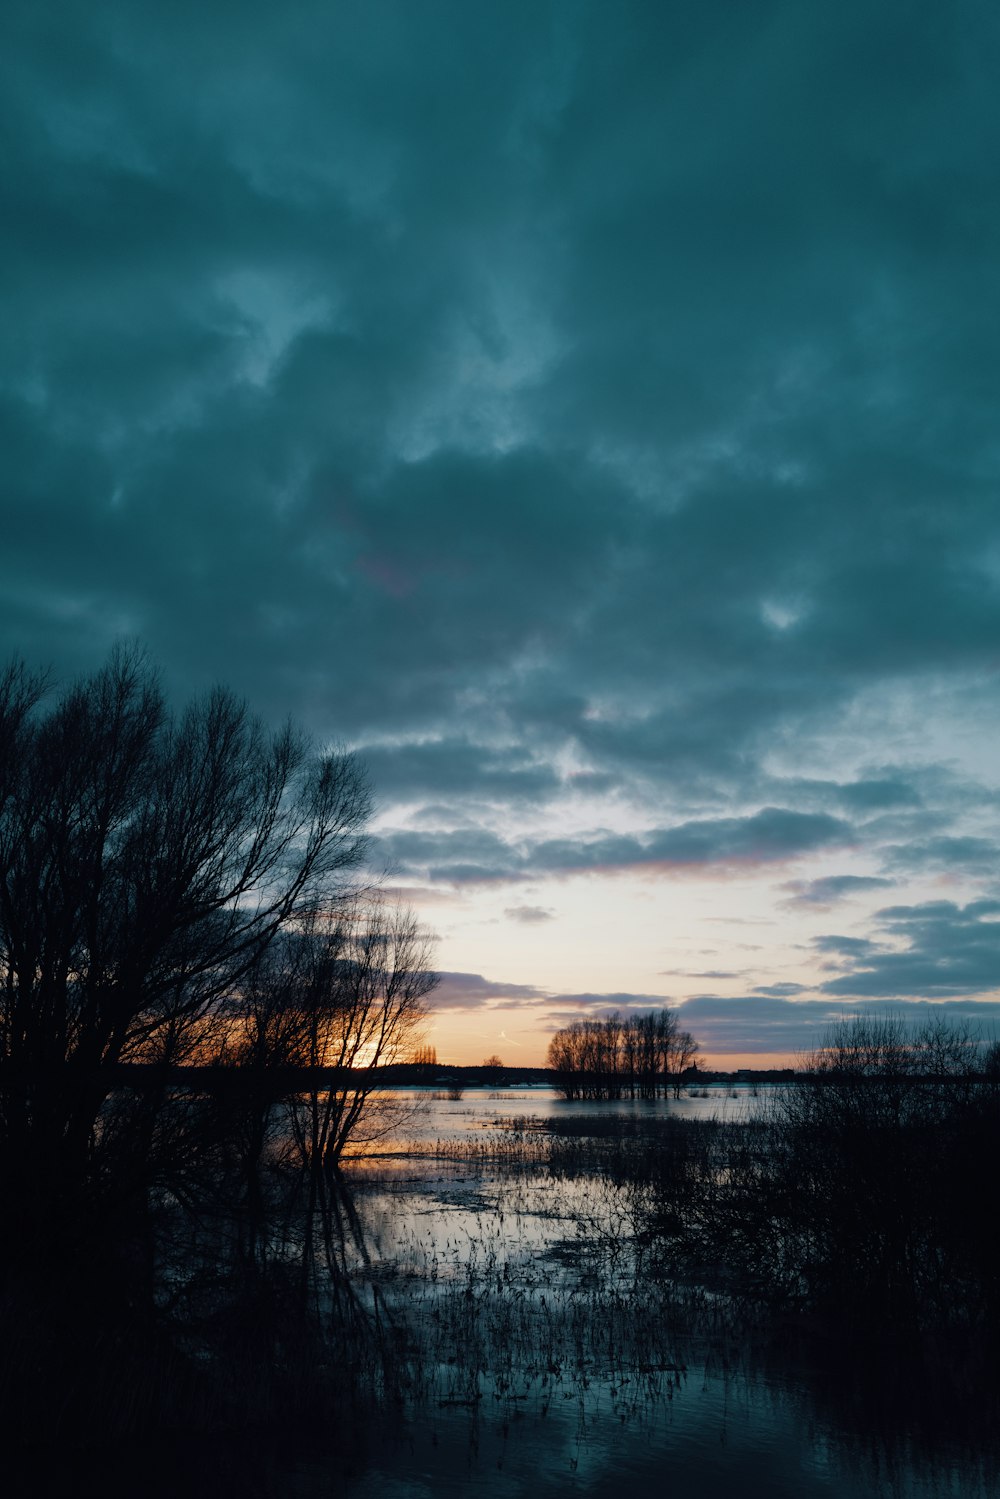 bare trees near body of water under cloudy sky during daytime